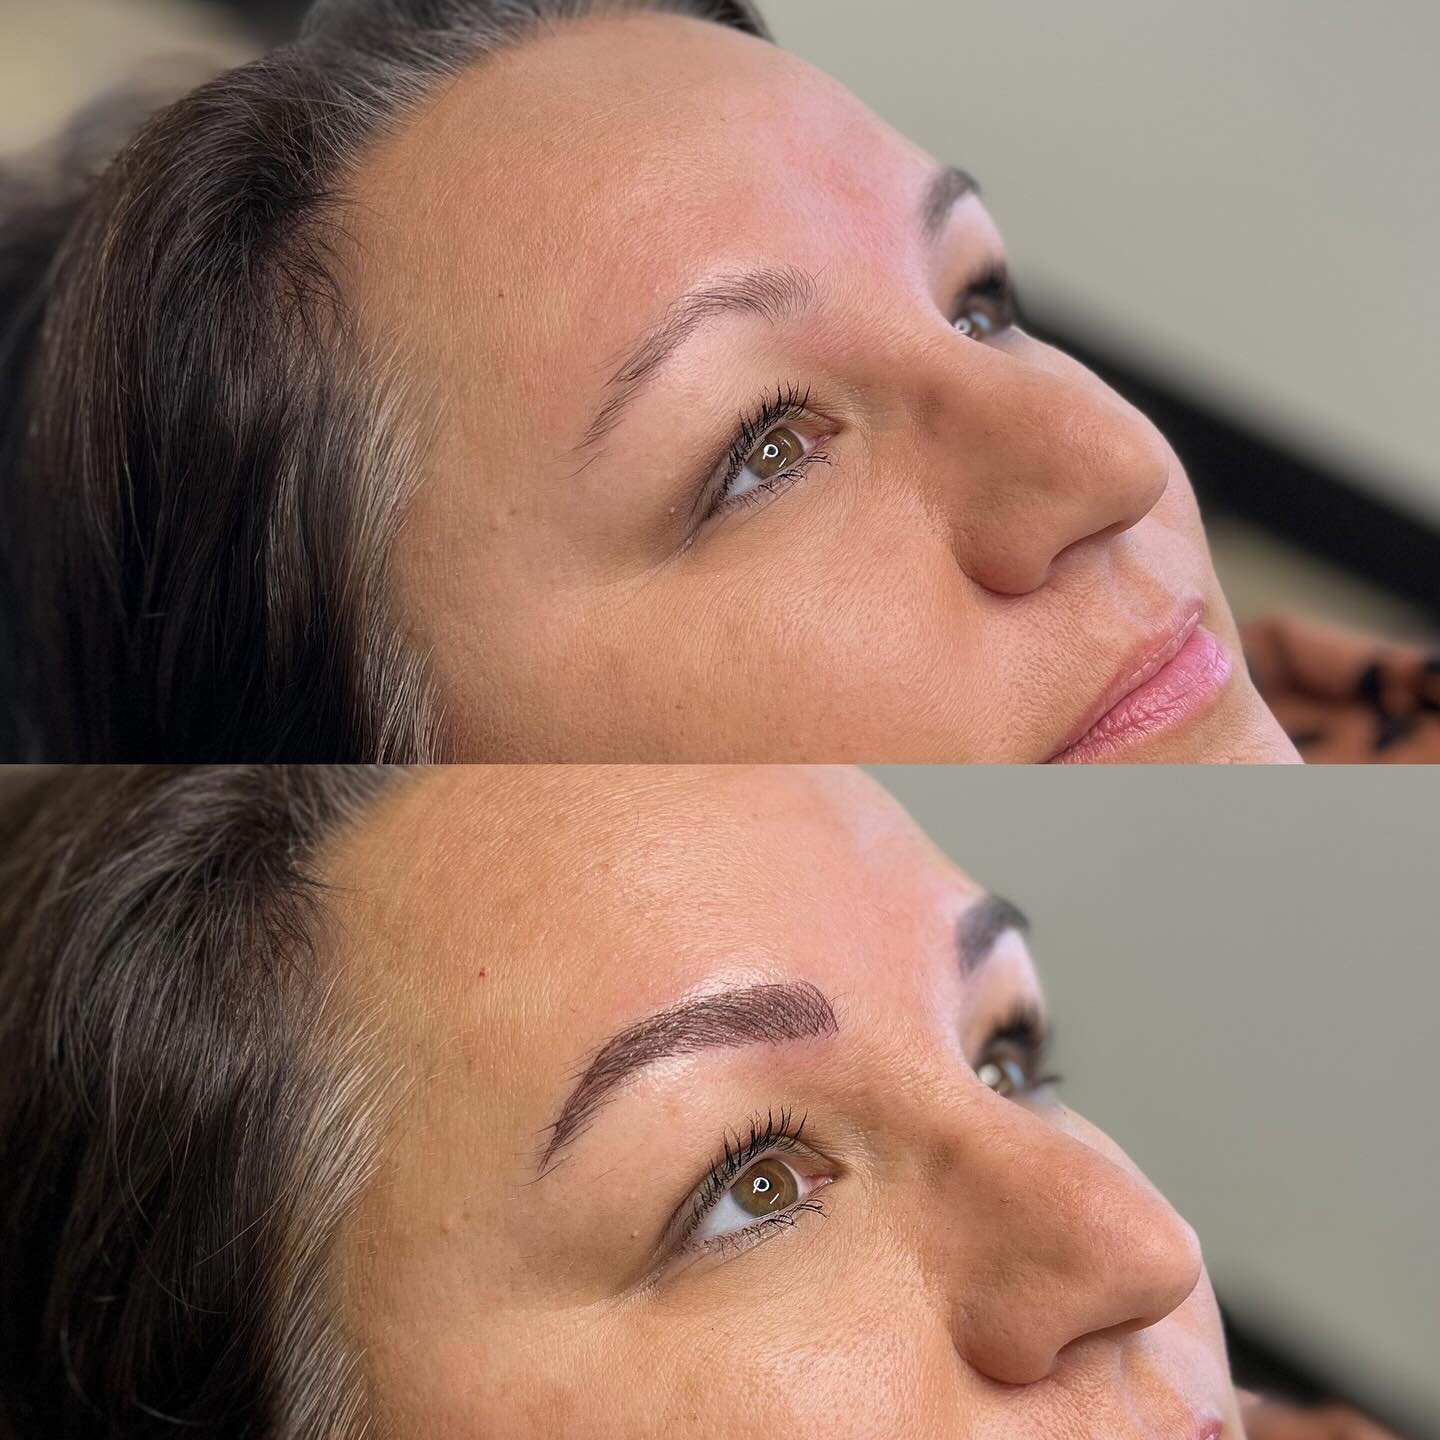 🗳️ Filing this under Completely Obsessed 

Only ✌🏼 spots left for May! That&rsquo;s just ✌🏼 more chances for $50 off using Code: BROWS50 

#kansascitymicroblading #thatsbrowlove #kcmicroblading #kcbrow #shawneeks #microblading #browsonpoint #suble